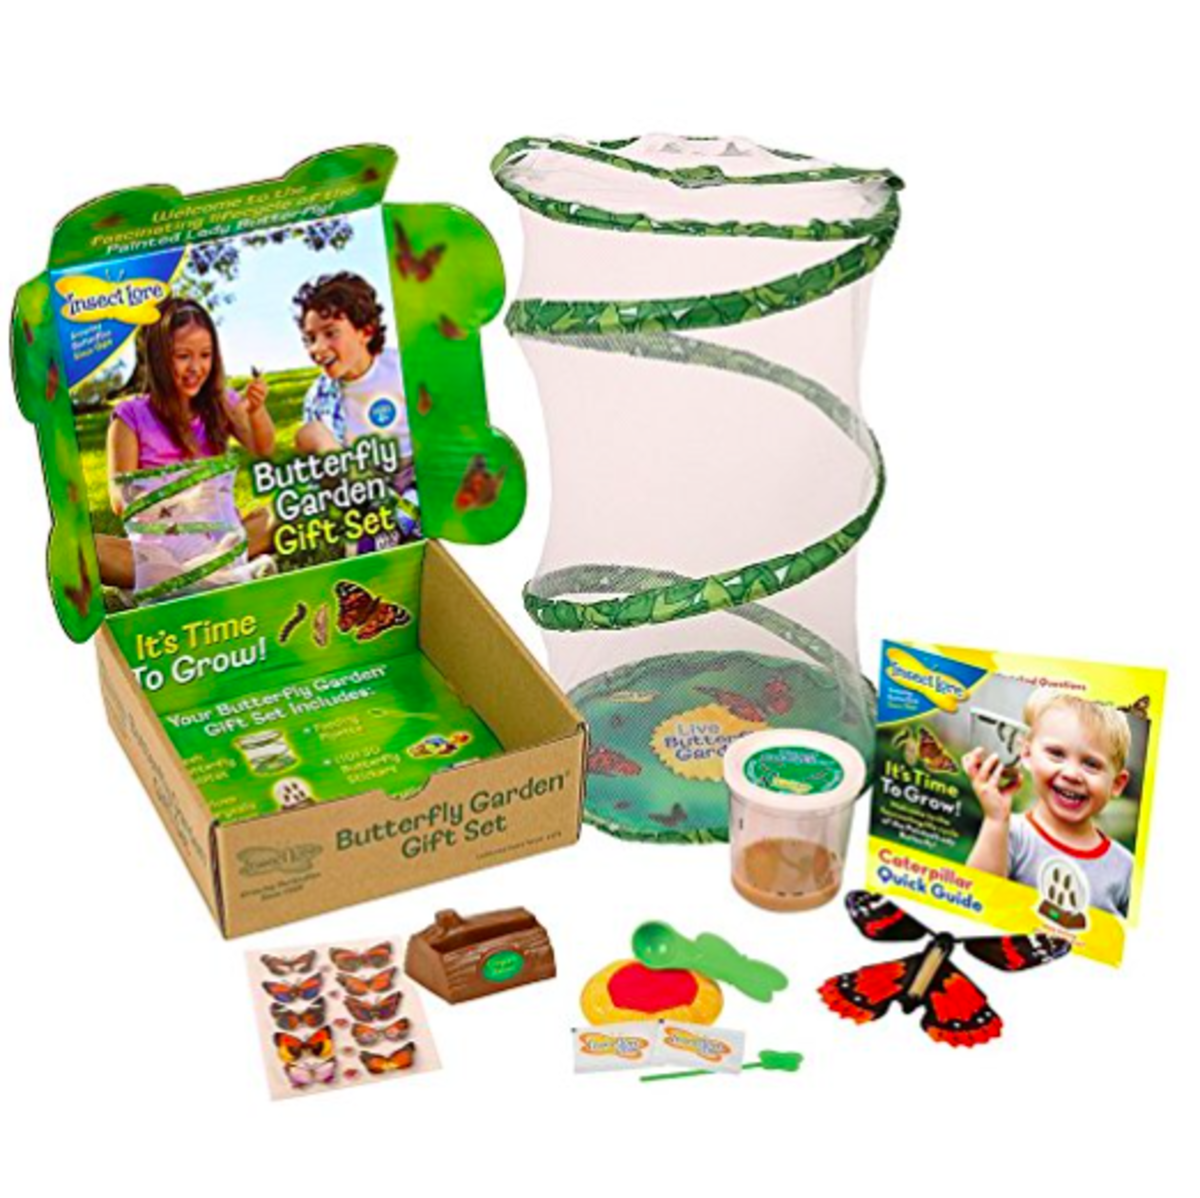 stem science kits, STEM toys for kids, STEM learning, educational toys, educational insights, talking telescope, nancy b science club, insect lore, live butterflies, butterfly habitat, science for kids, science, science gifts, gifts for kids, telescope, kids gardening, compost, STEM gifts